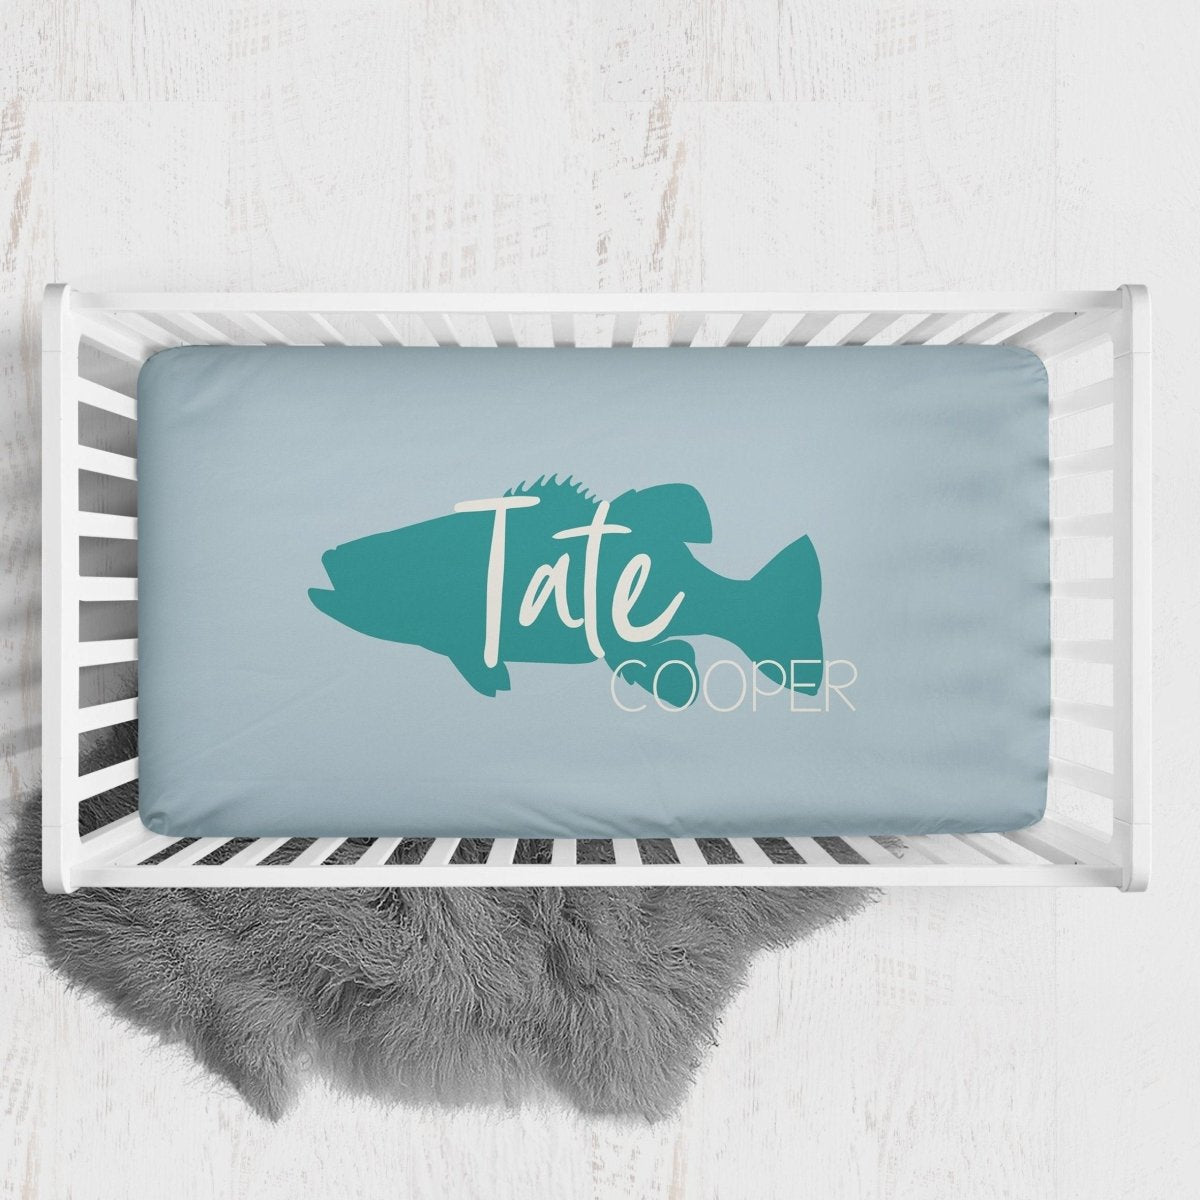 Fishing Time Personalized Crib Sheet - gender_boy, Personalized_Yes, text